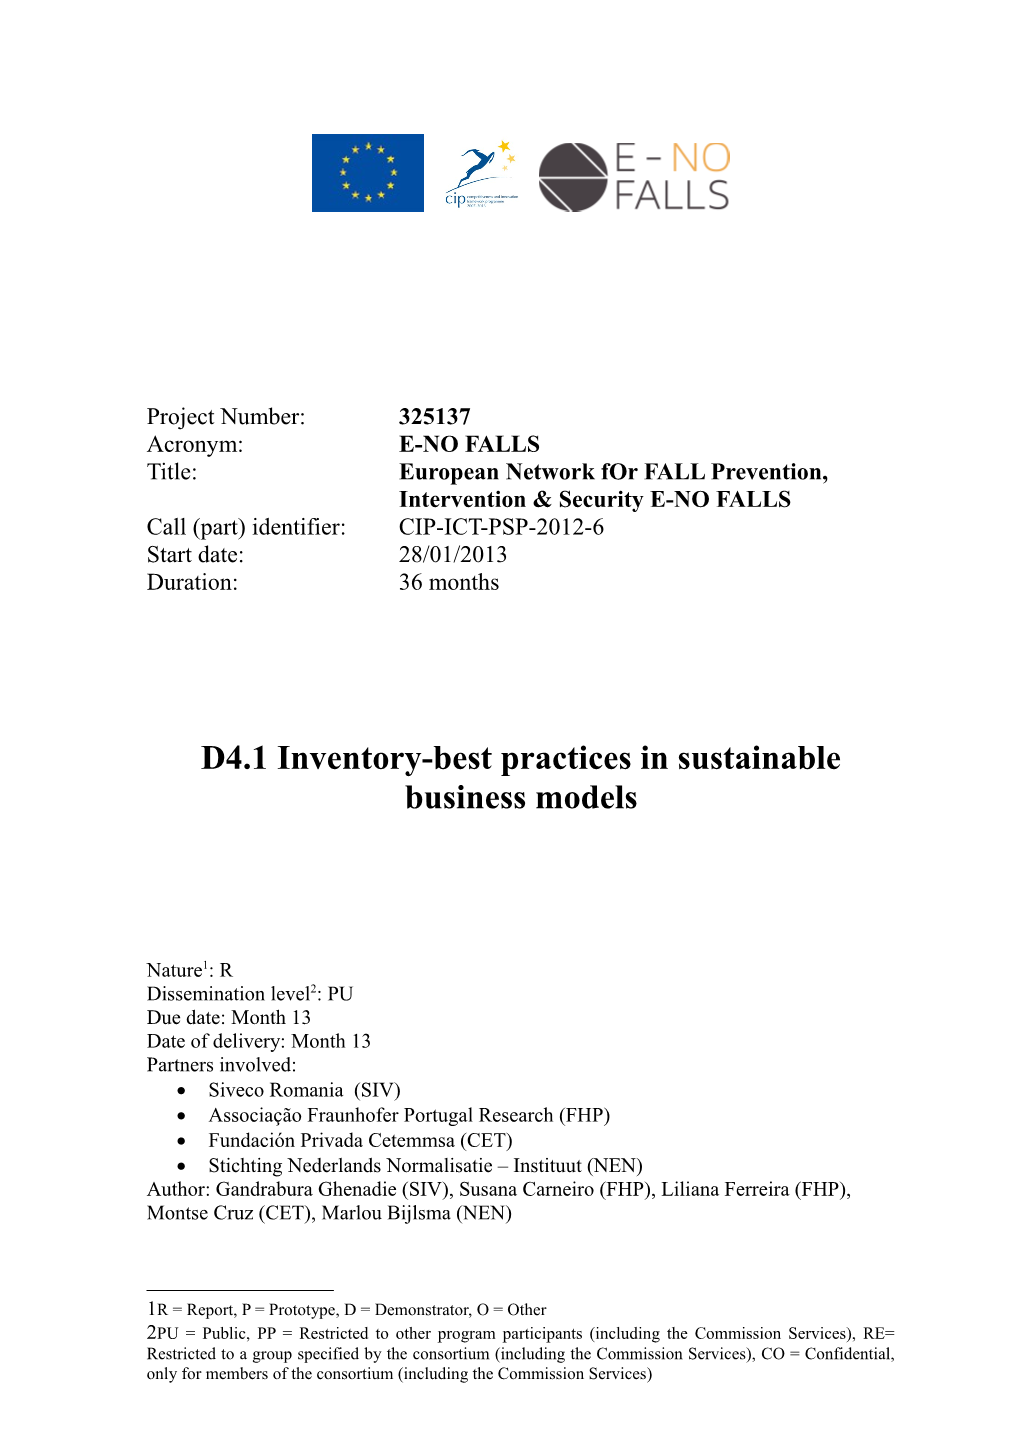 D4.1 Inventory-Best Practices in Sustainable Business Models